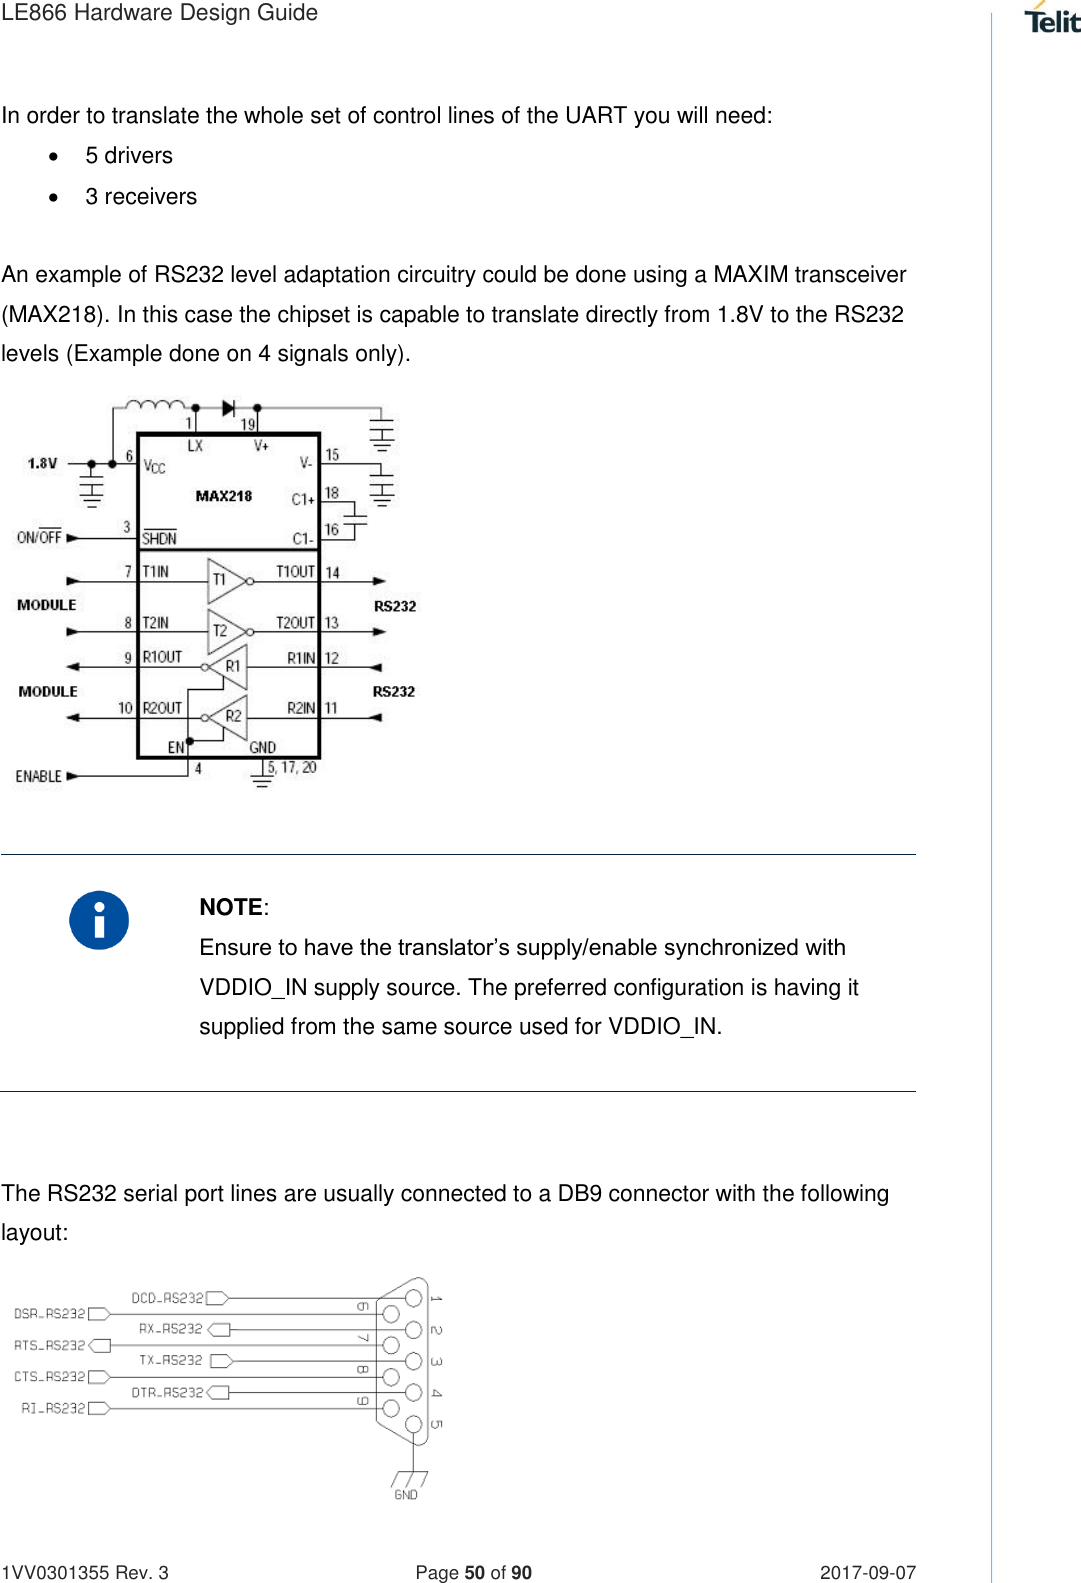 LE866 Hardware Design Guide   1VV0301355 Rev. 3   Page 50 of 90 2017-09-07  In order to translate the whole set of control lines of the UART you will need:   5 drivers   3 receivers  An example of RS232 level adaptation circuitry could be done using a MAXIM transceiver (MAX218). In this case the chipset is capable to translate directly from 1.8V to the RS232 levels (Example done on 4 signals only).               NOTE: Ensure to have the translator’s supply/enable synchronized with VDDIO_IN supply source. The preferred configuration is having it supplied from the same source used for VDDIO_IN.   The RS232 serial port lines are usually connected to a DB9 connector with the following layout:        